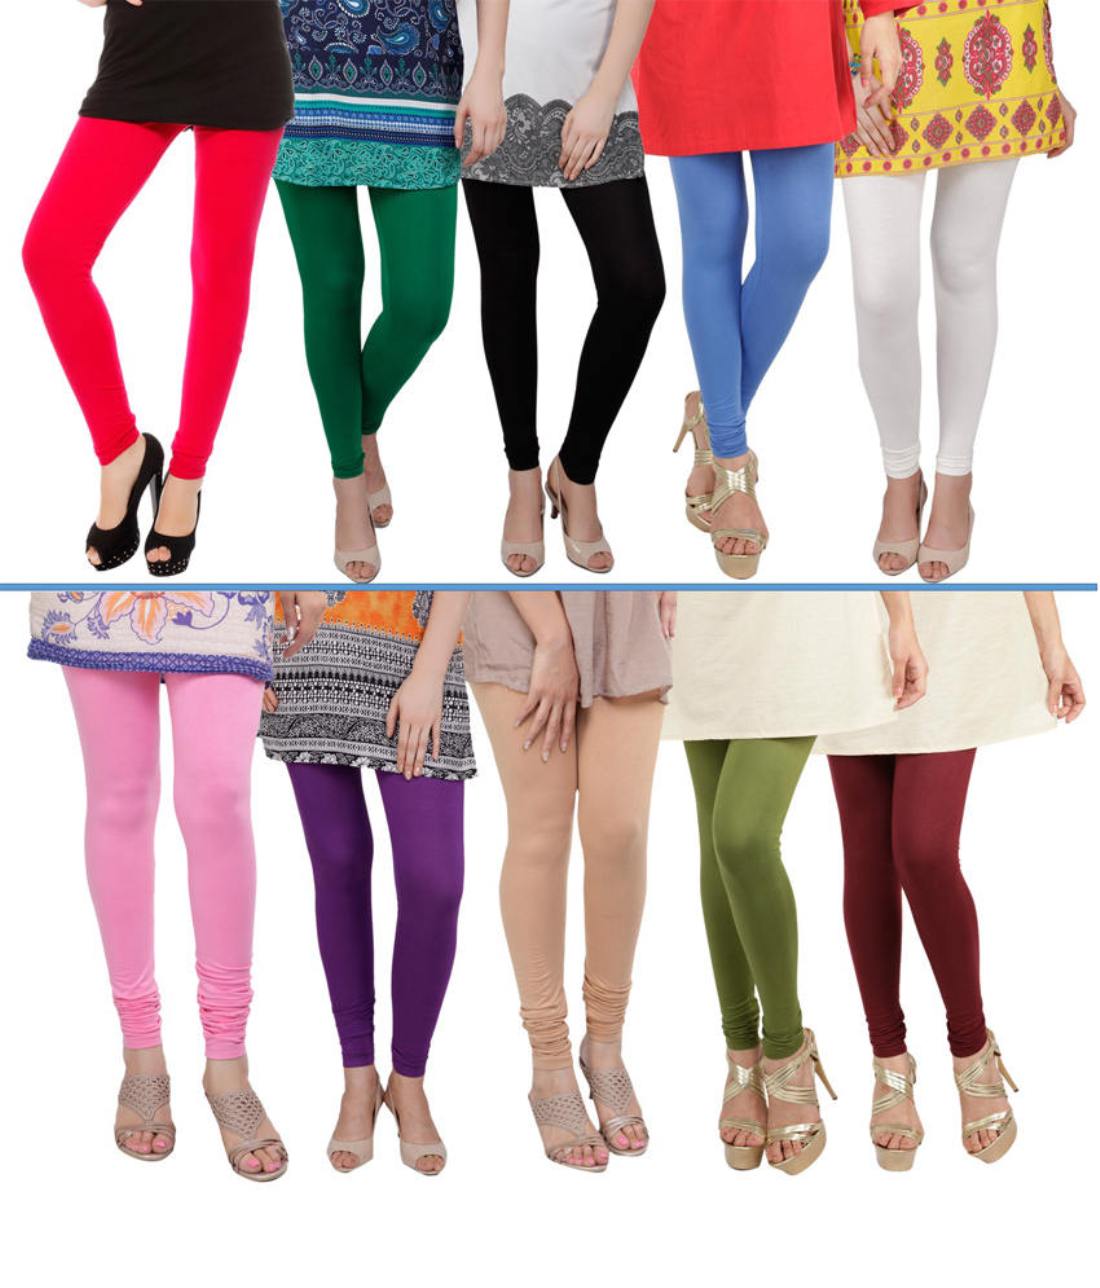 All Colors Available Ladies Lyra Legging at Best Price in Halol